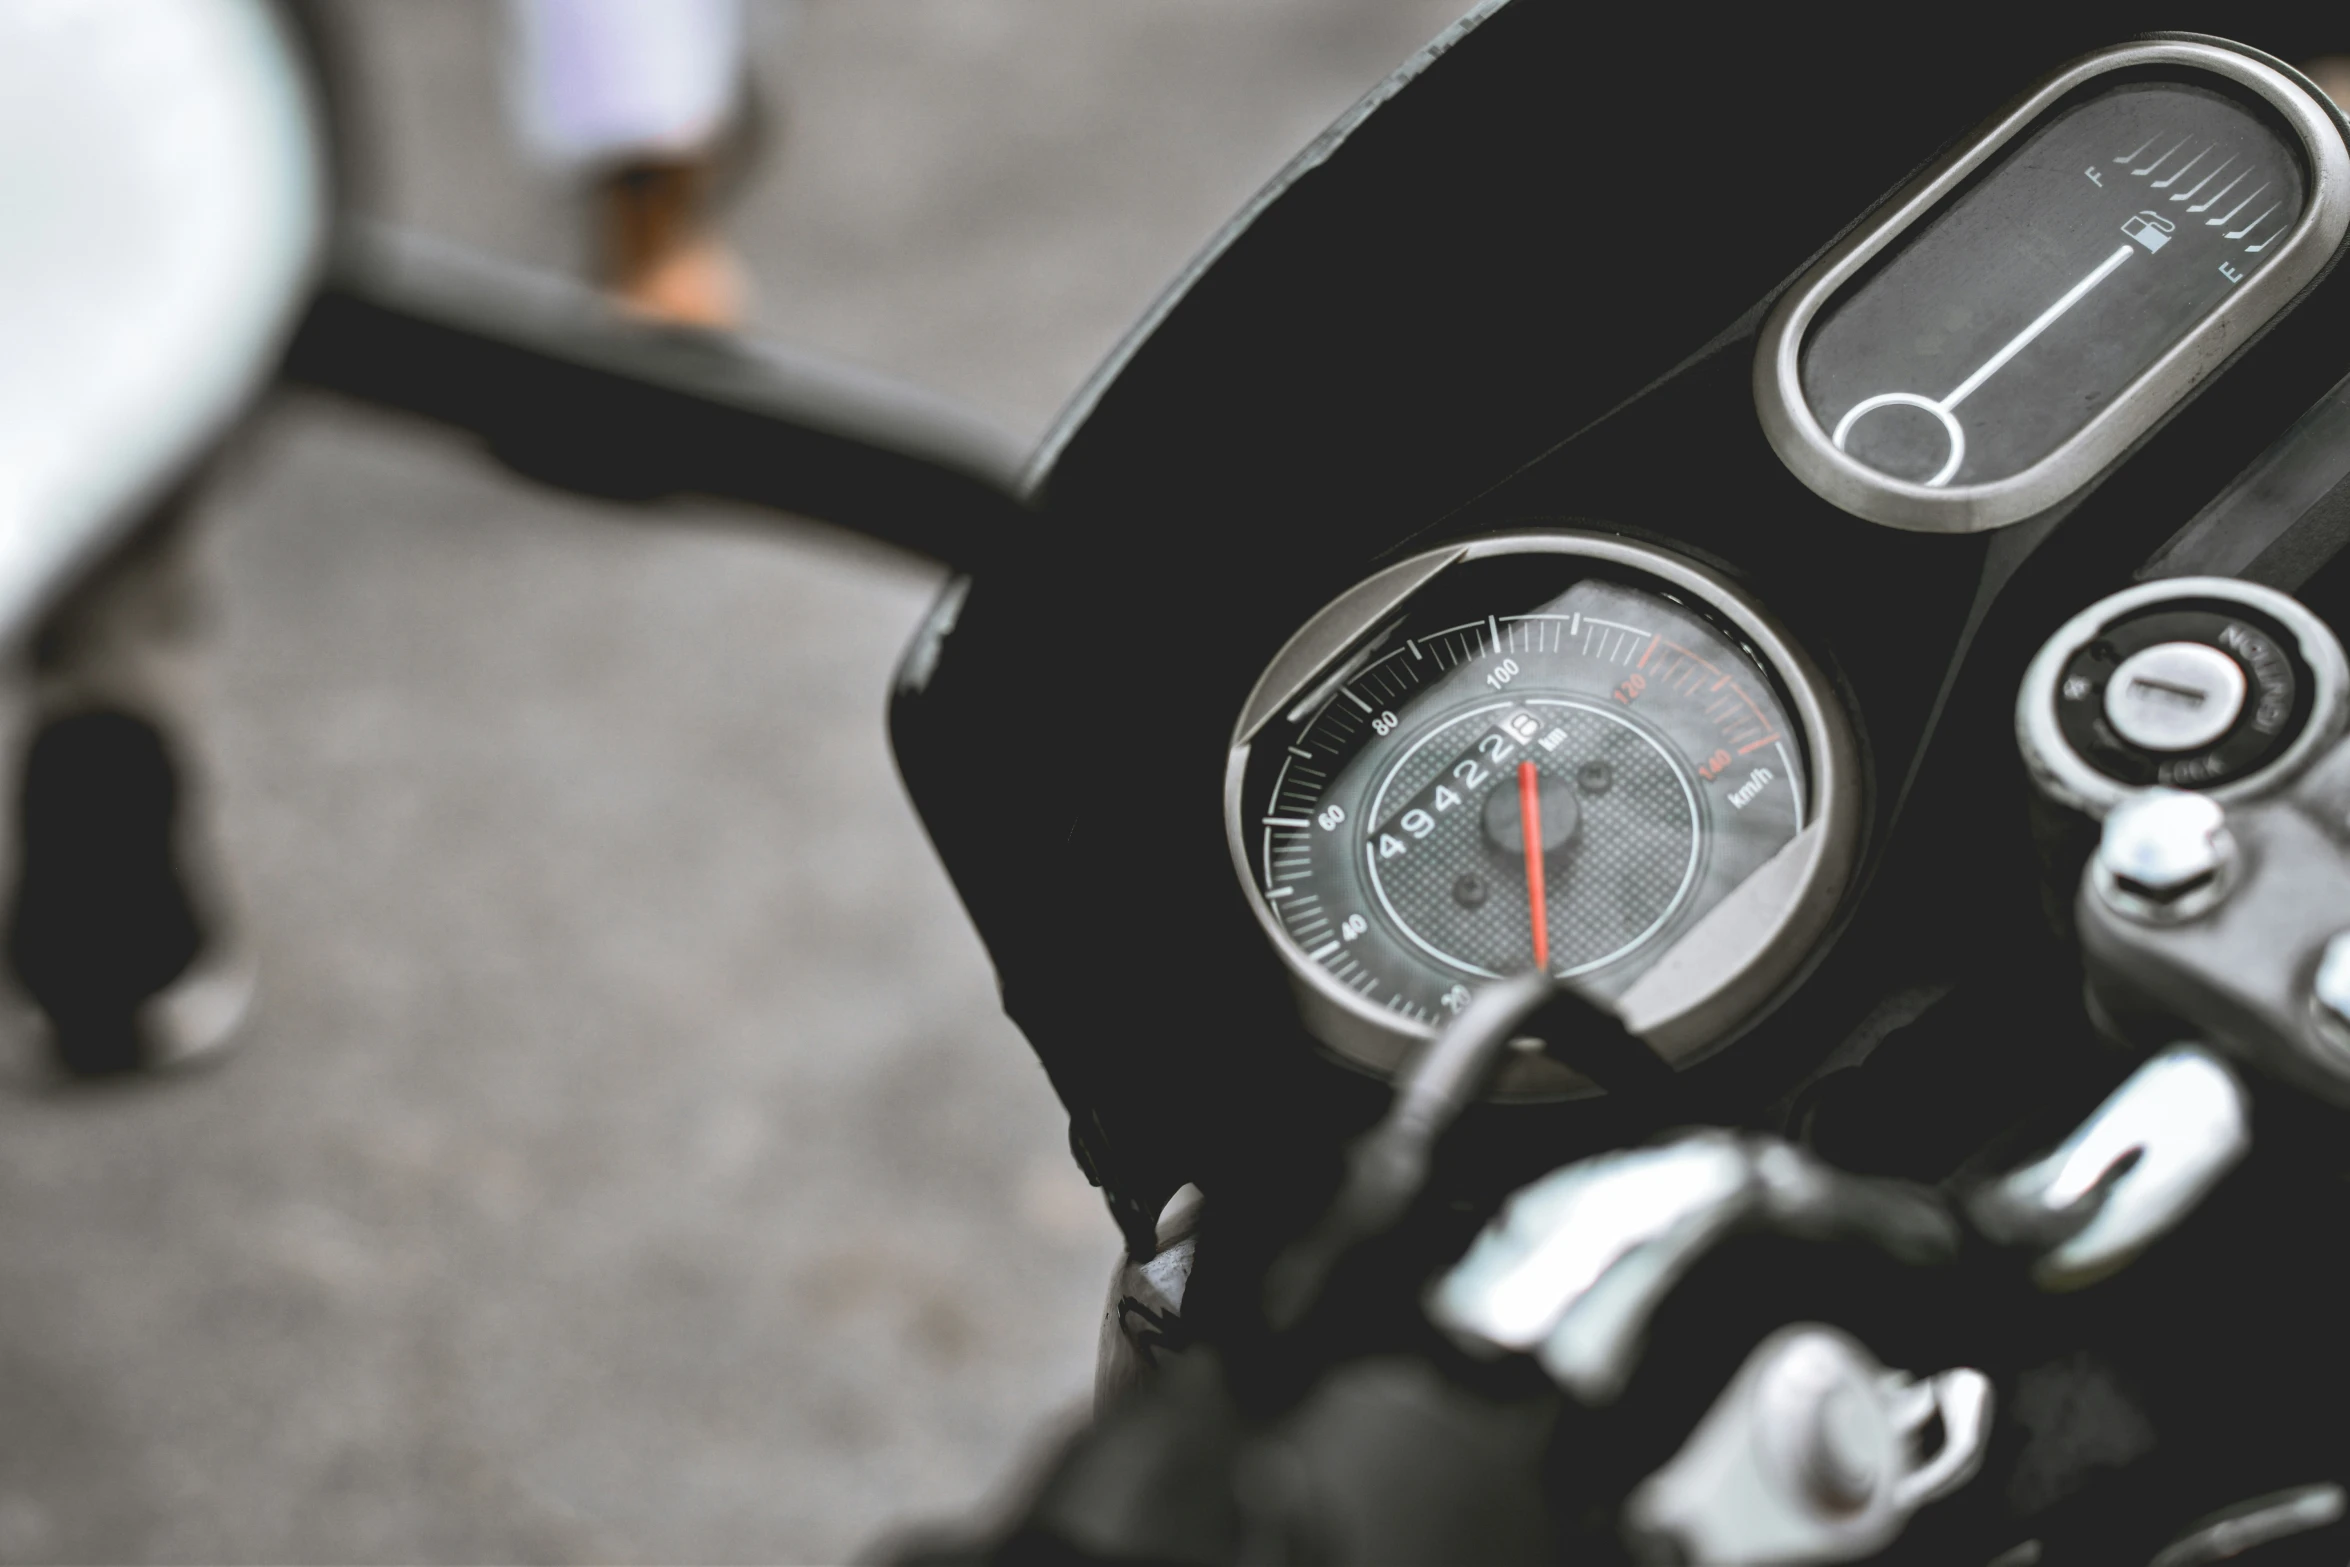 the motorcycle dashboard of a motorbike in front of people